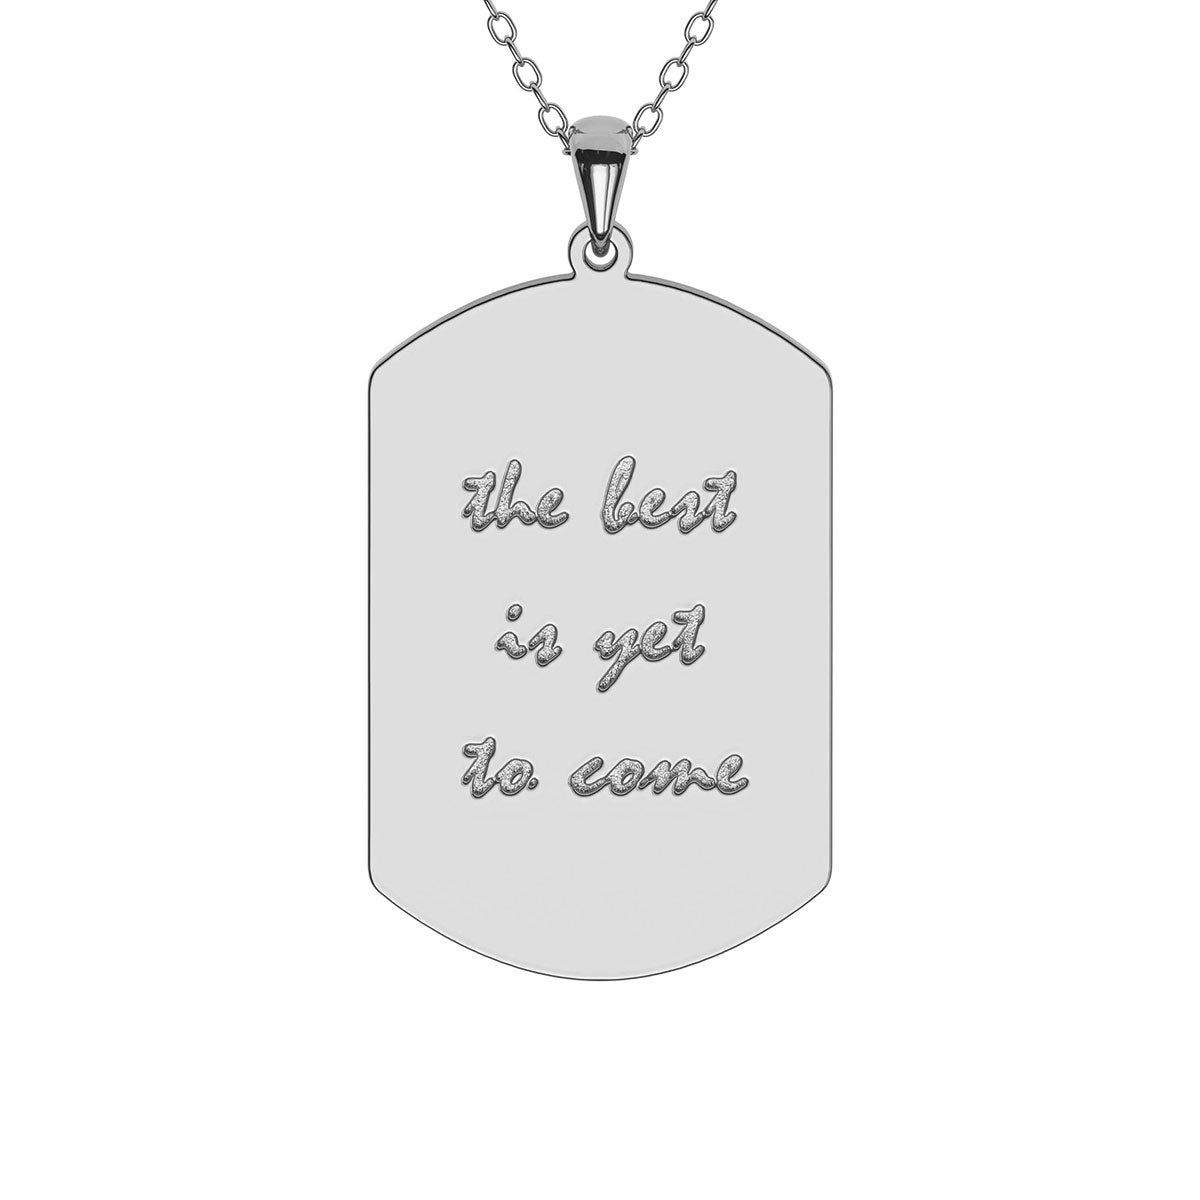 Personalized Tag Necklace with Engraving